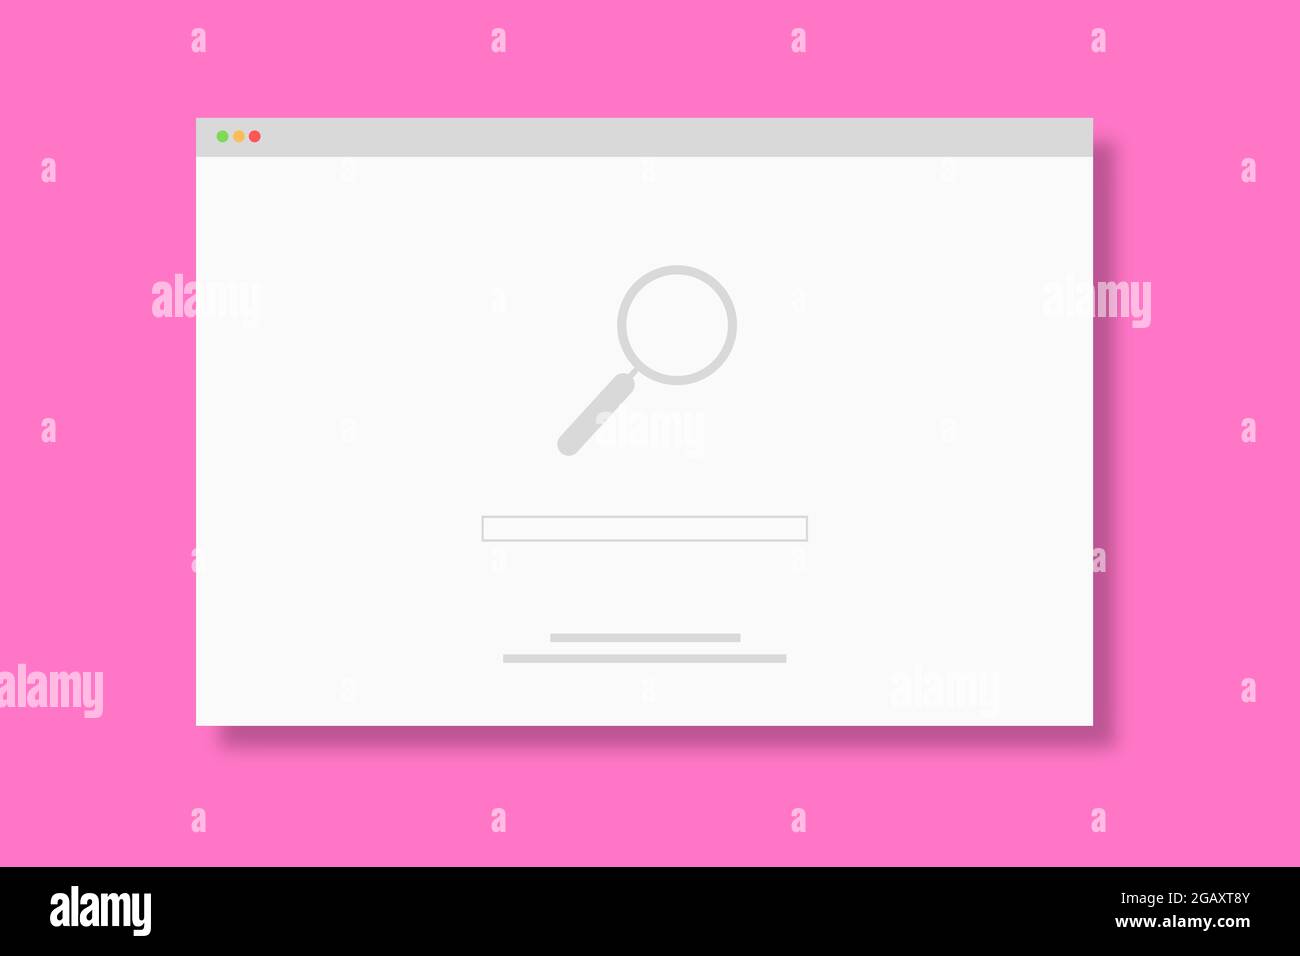 Internet browser window with search engine website - flat illustration, pink background Stock Photo